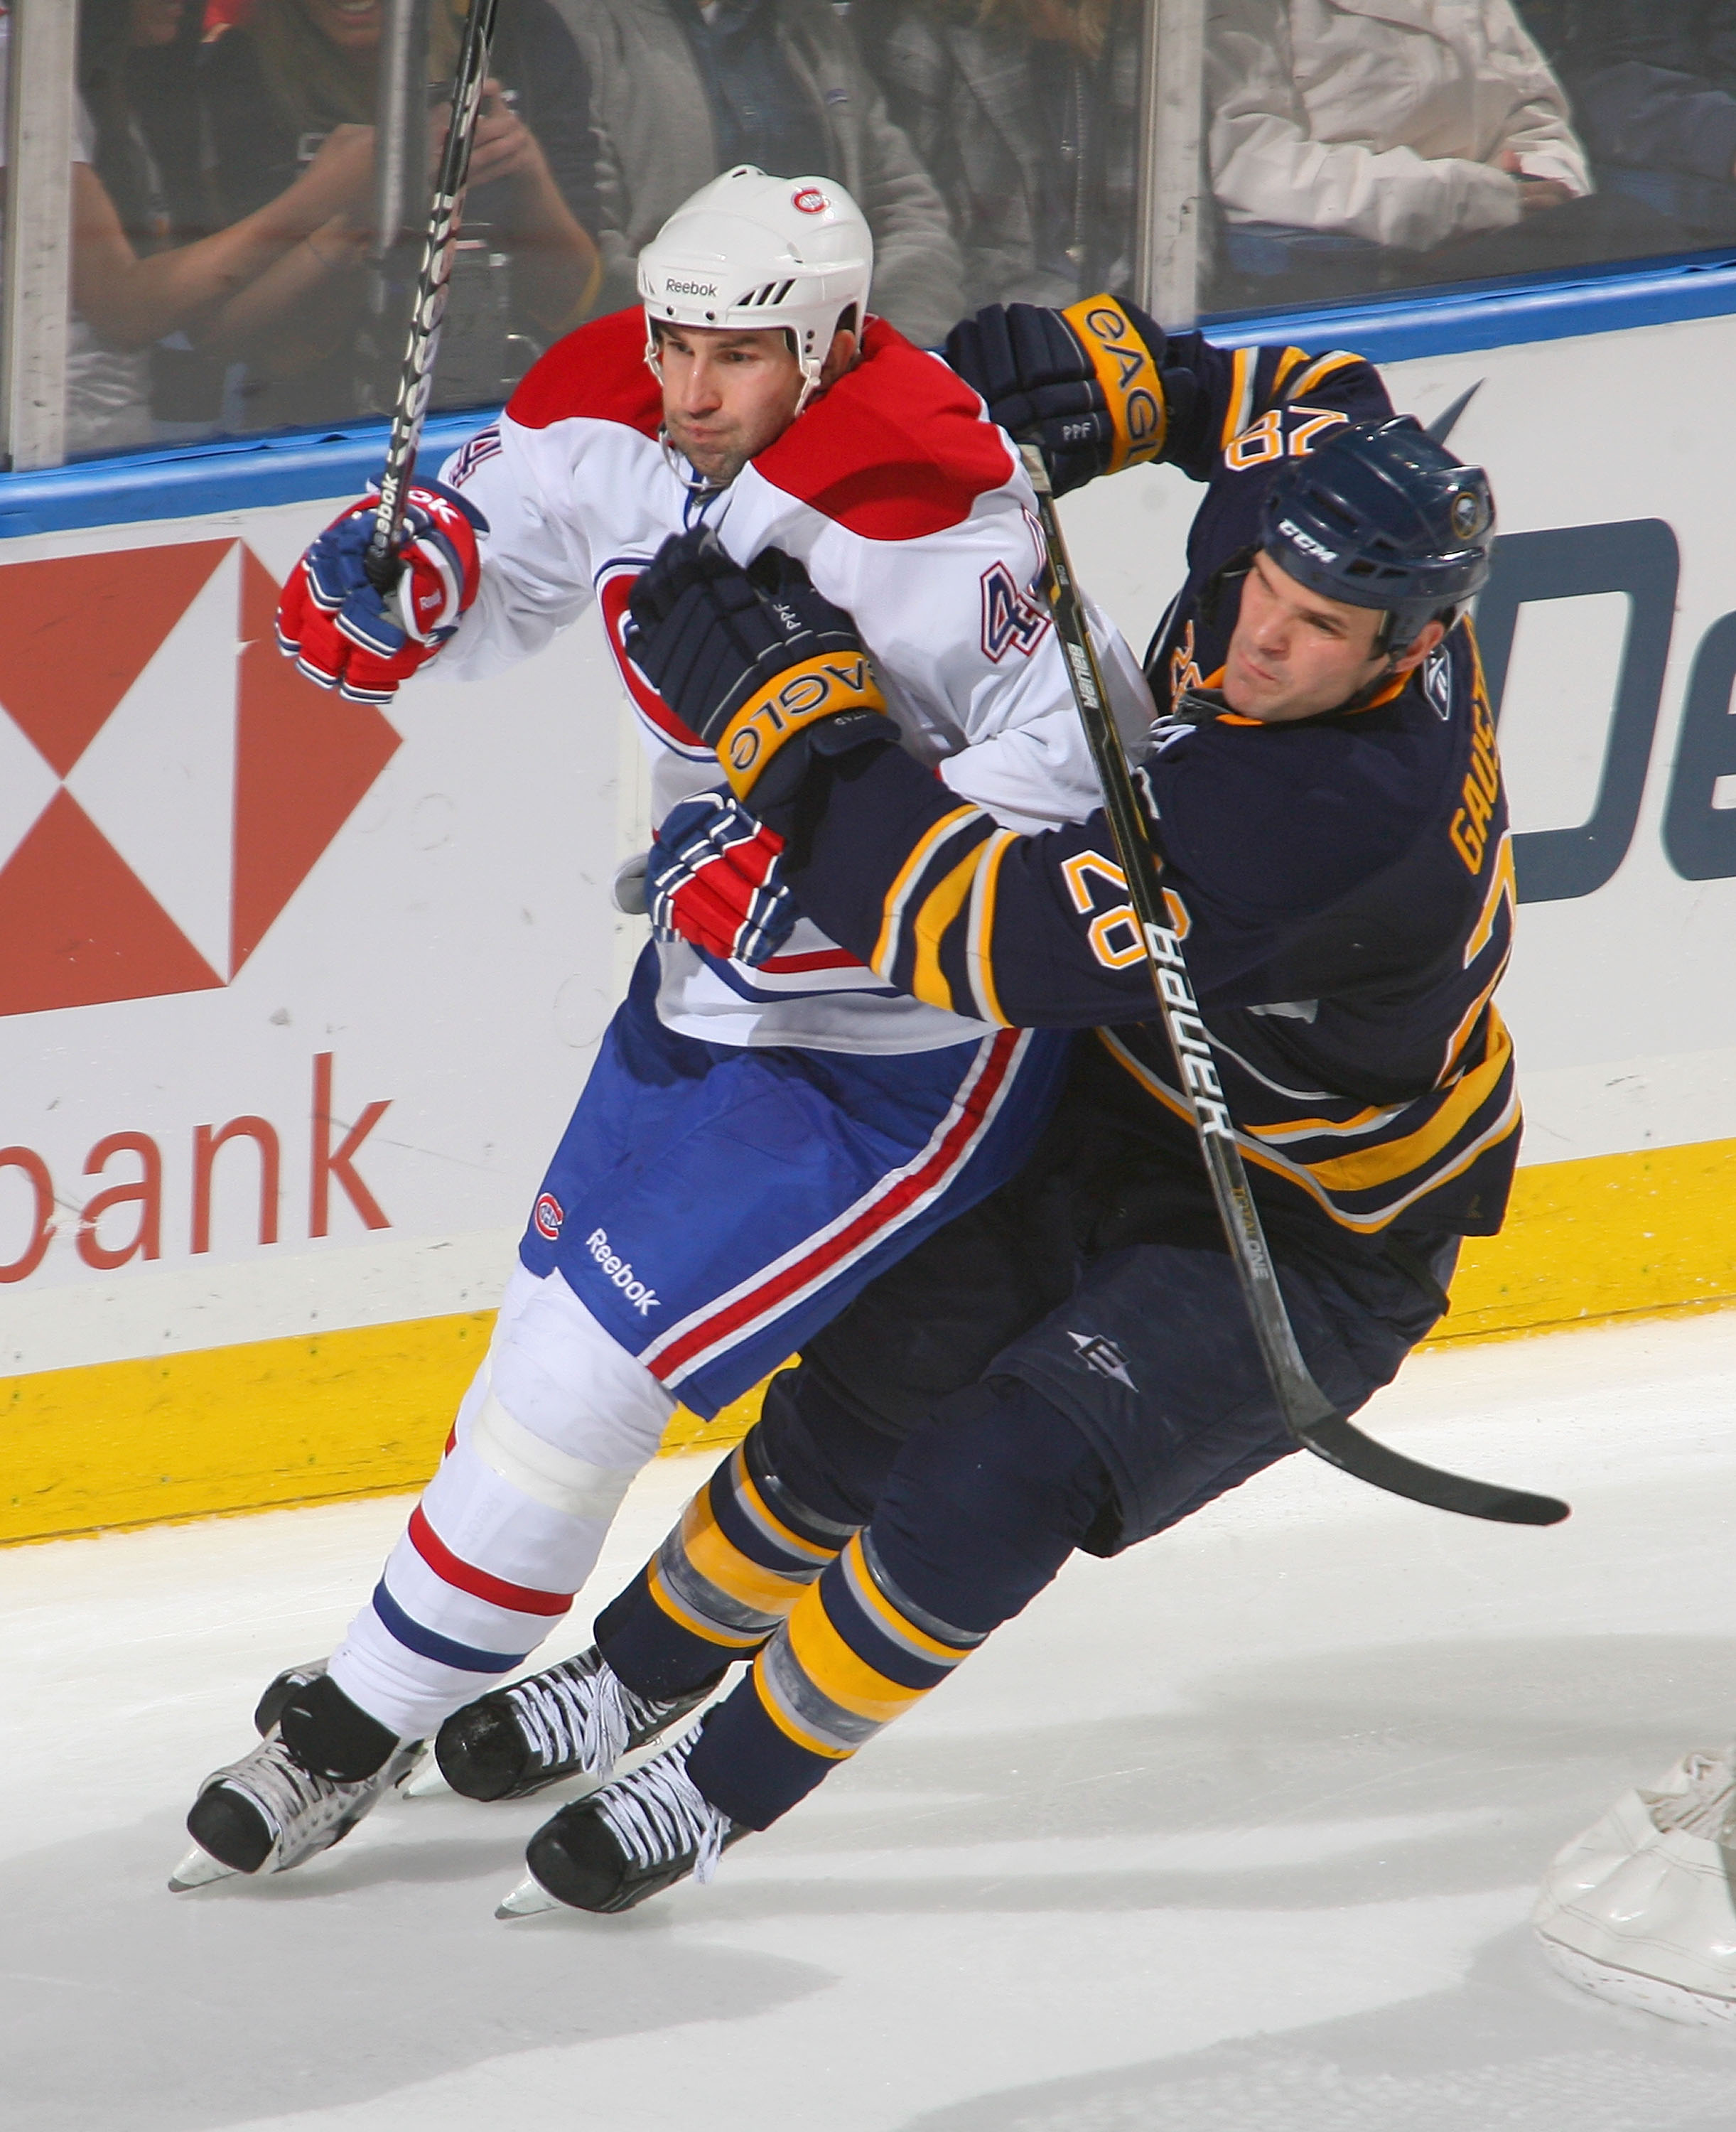 BUFFALO, NY - JANUARY 18: Paul Gaustad #28 of the Buffalo Sabres skates against Roman Hamrlik #44 of the Montreal Canadiens at HSBC Arena on January 18, 2011 in Buffalo, New York.  (Photo by Rick Stewart/Getty Images)